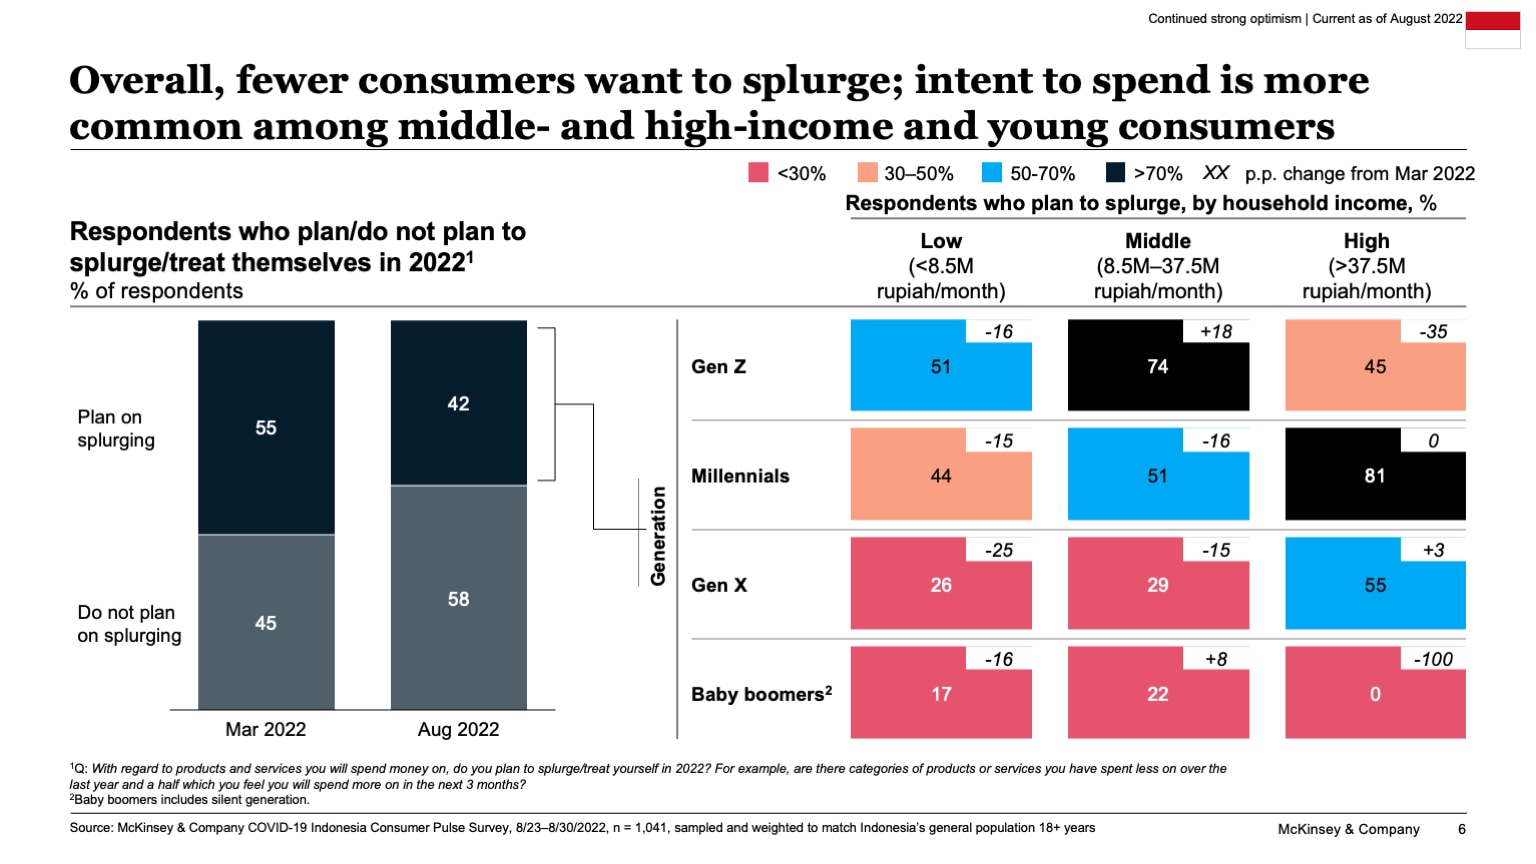 Overall, fewer consumers want to splurge; intent to spend is more common among middle- and high-income and young consumers